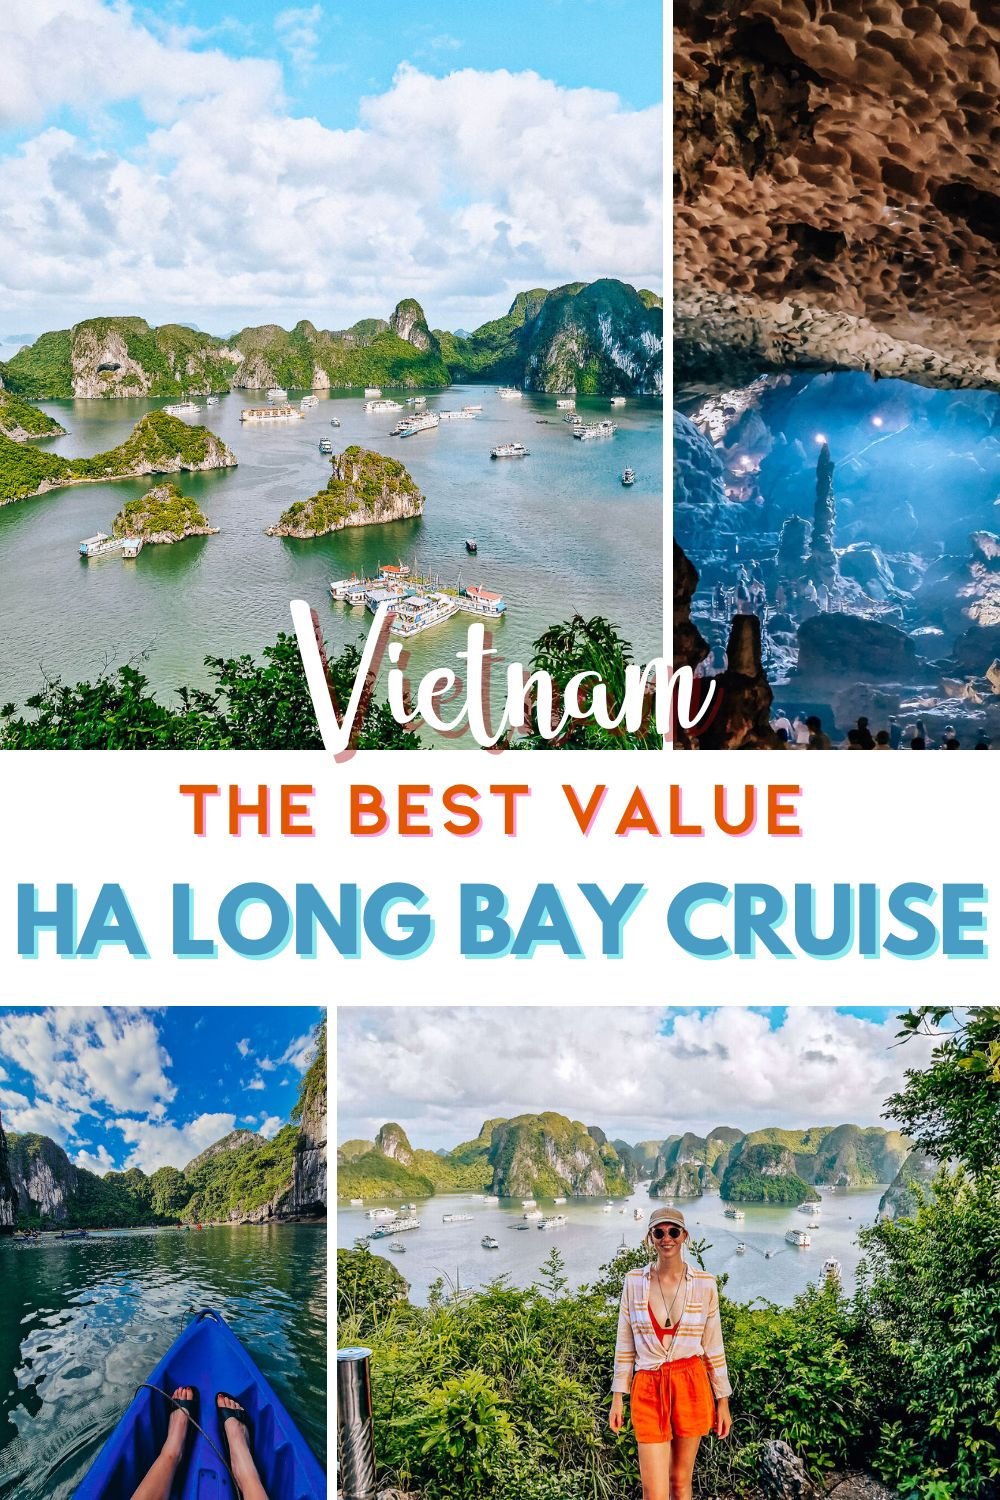 If you’re looking for the best Halong Bay cruise on a budget, this overnight cruise is the best value for money to see the famous Ha Long Bay: visit caves and beaches, go hiking and kayaking, plus all your meals, accommodation and transport are inclu